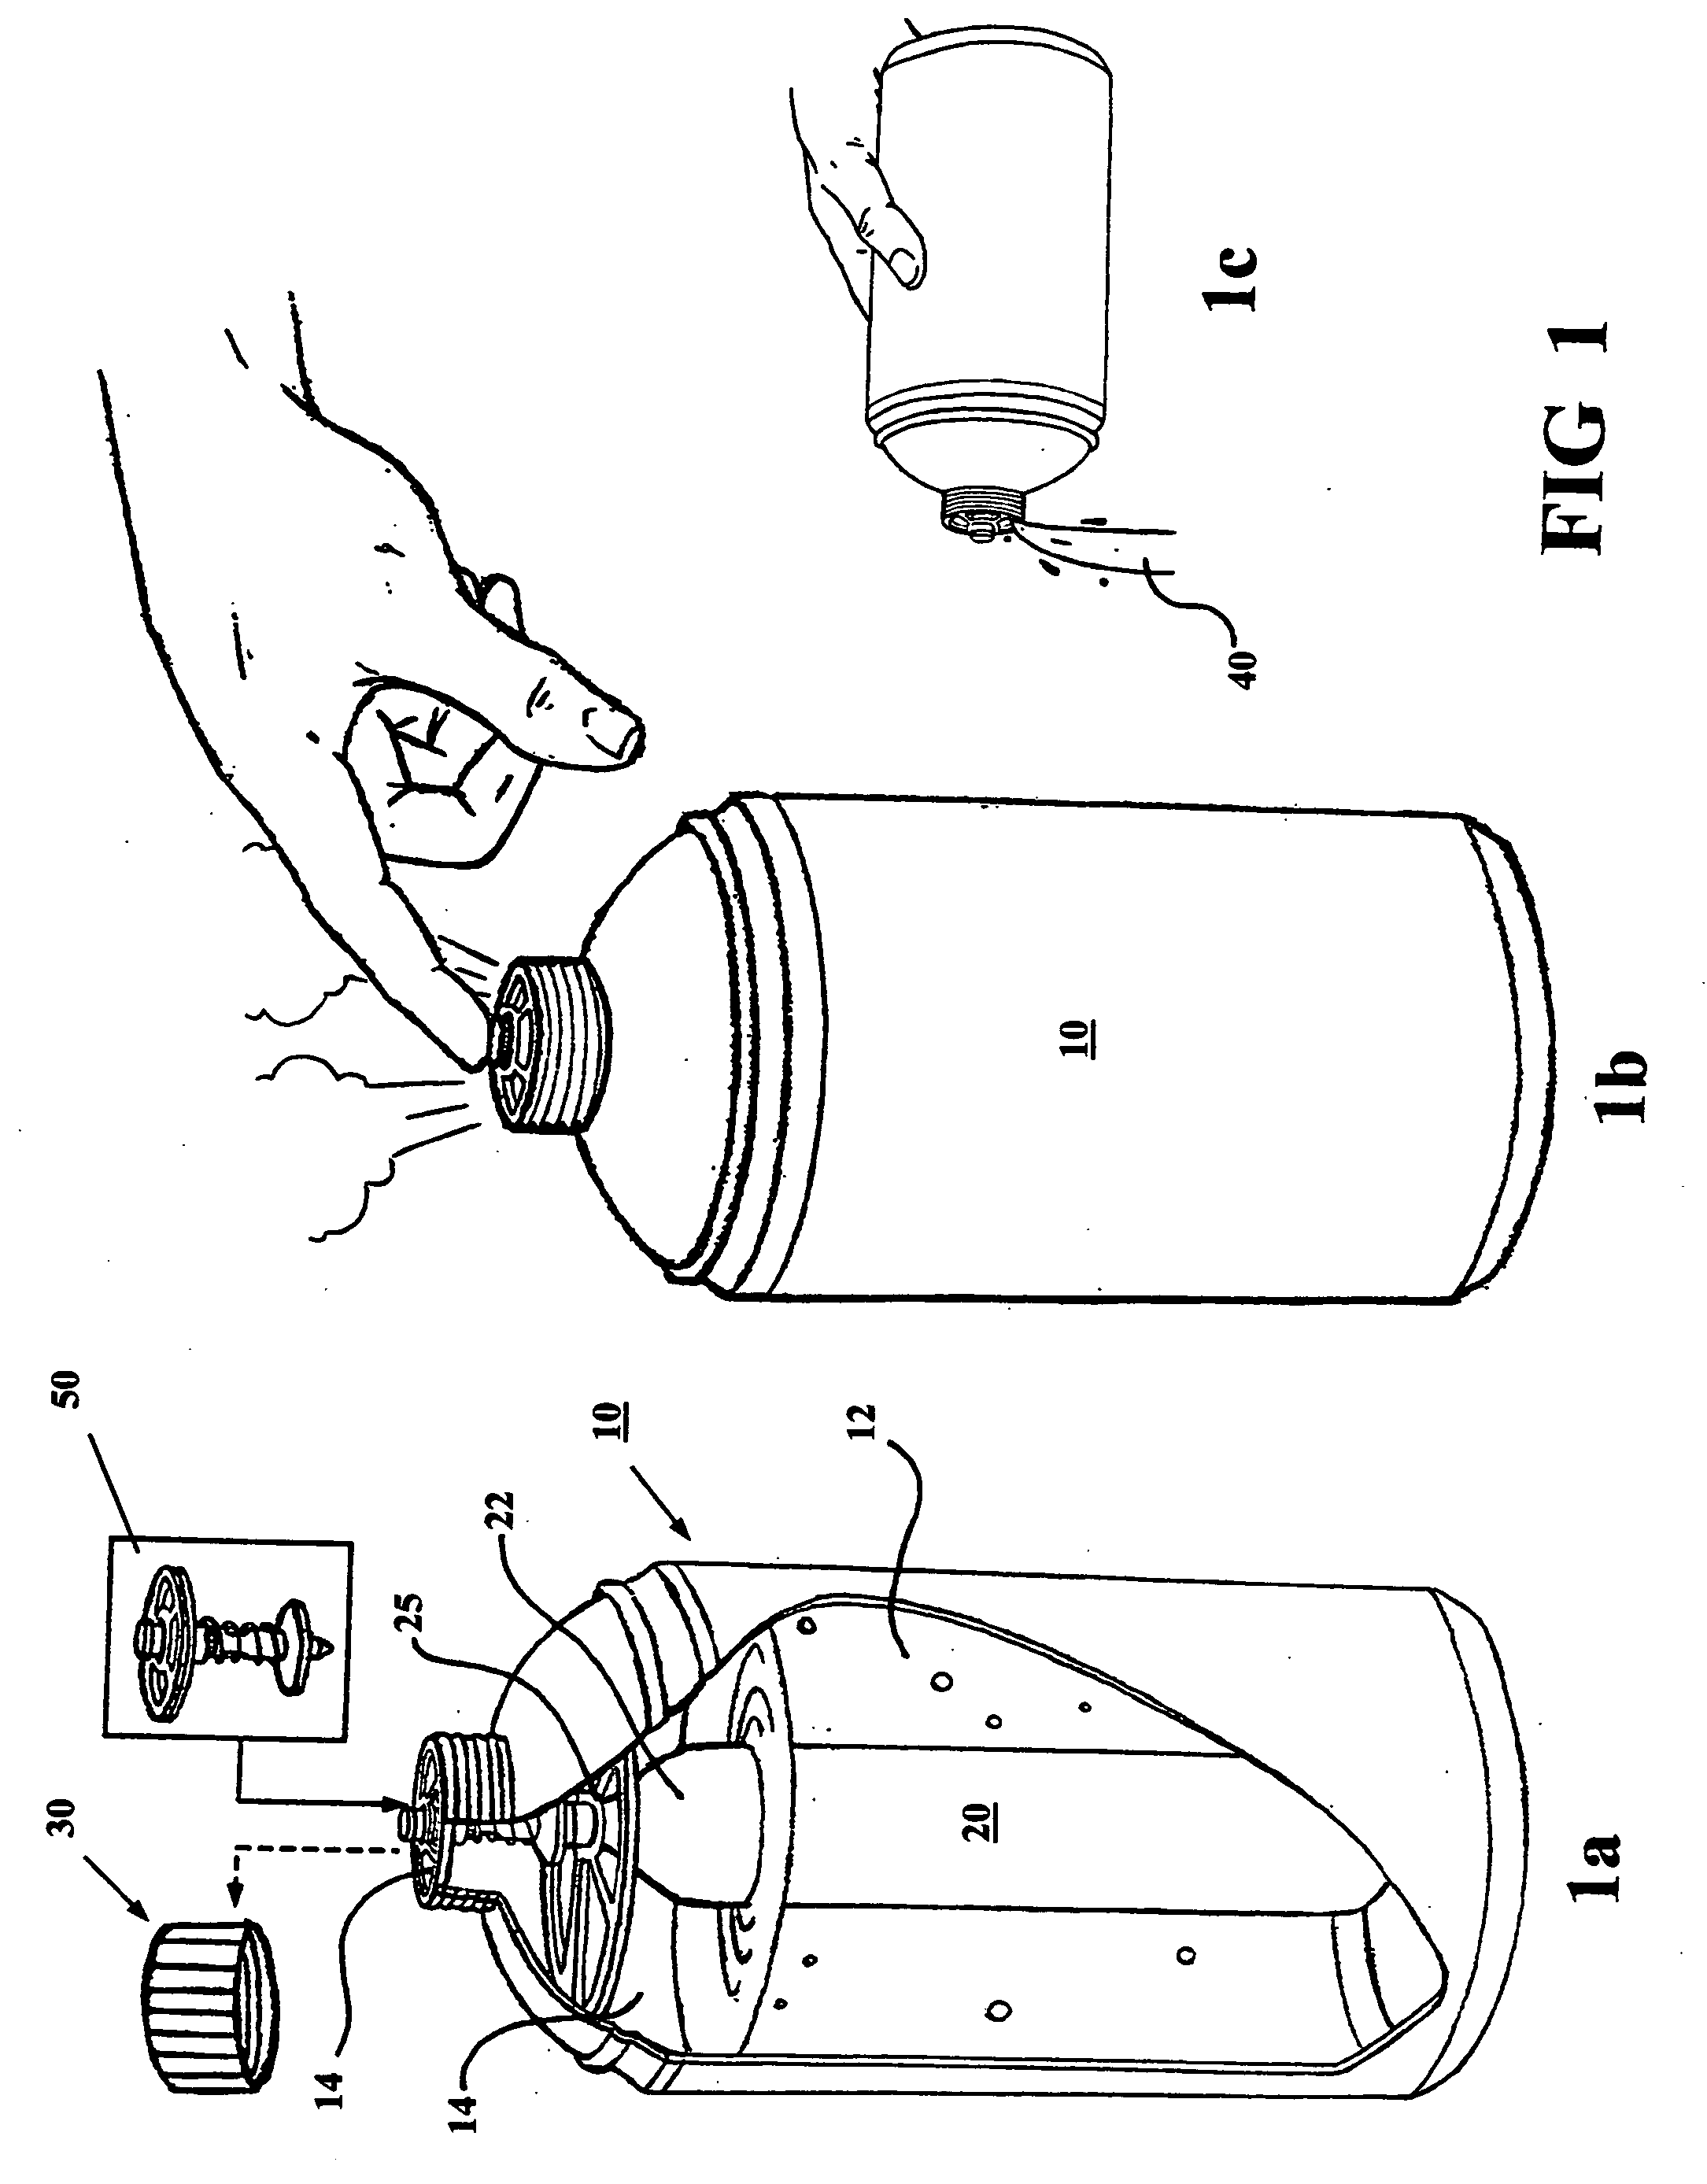 Self-chilling beverage container and method